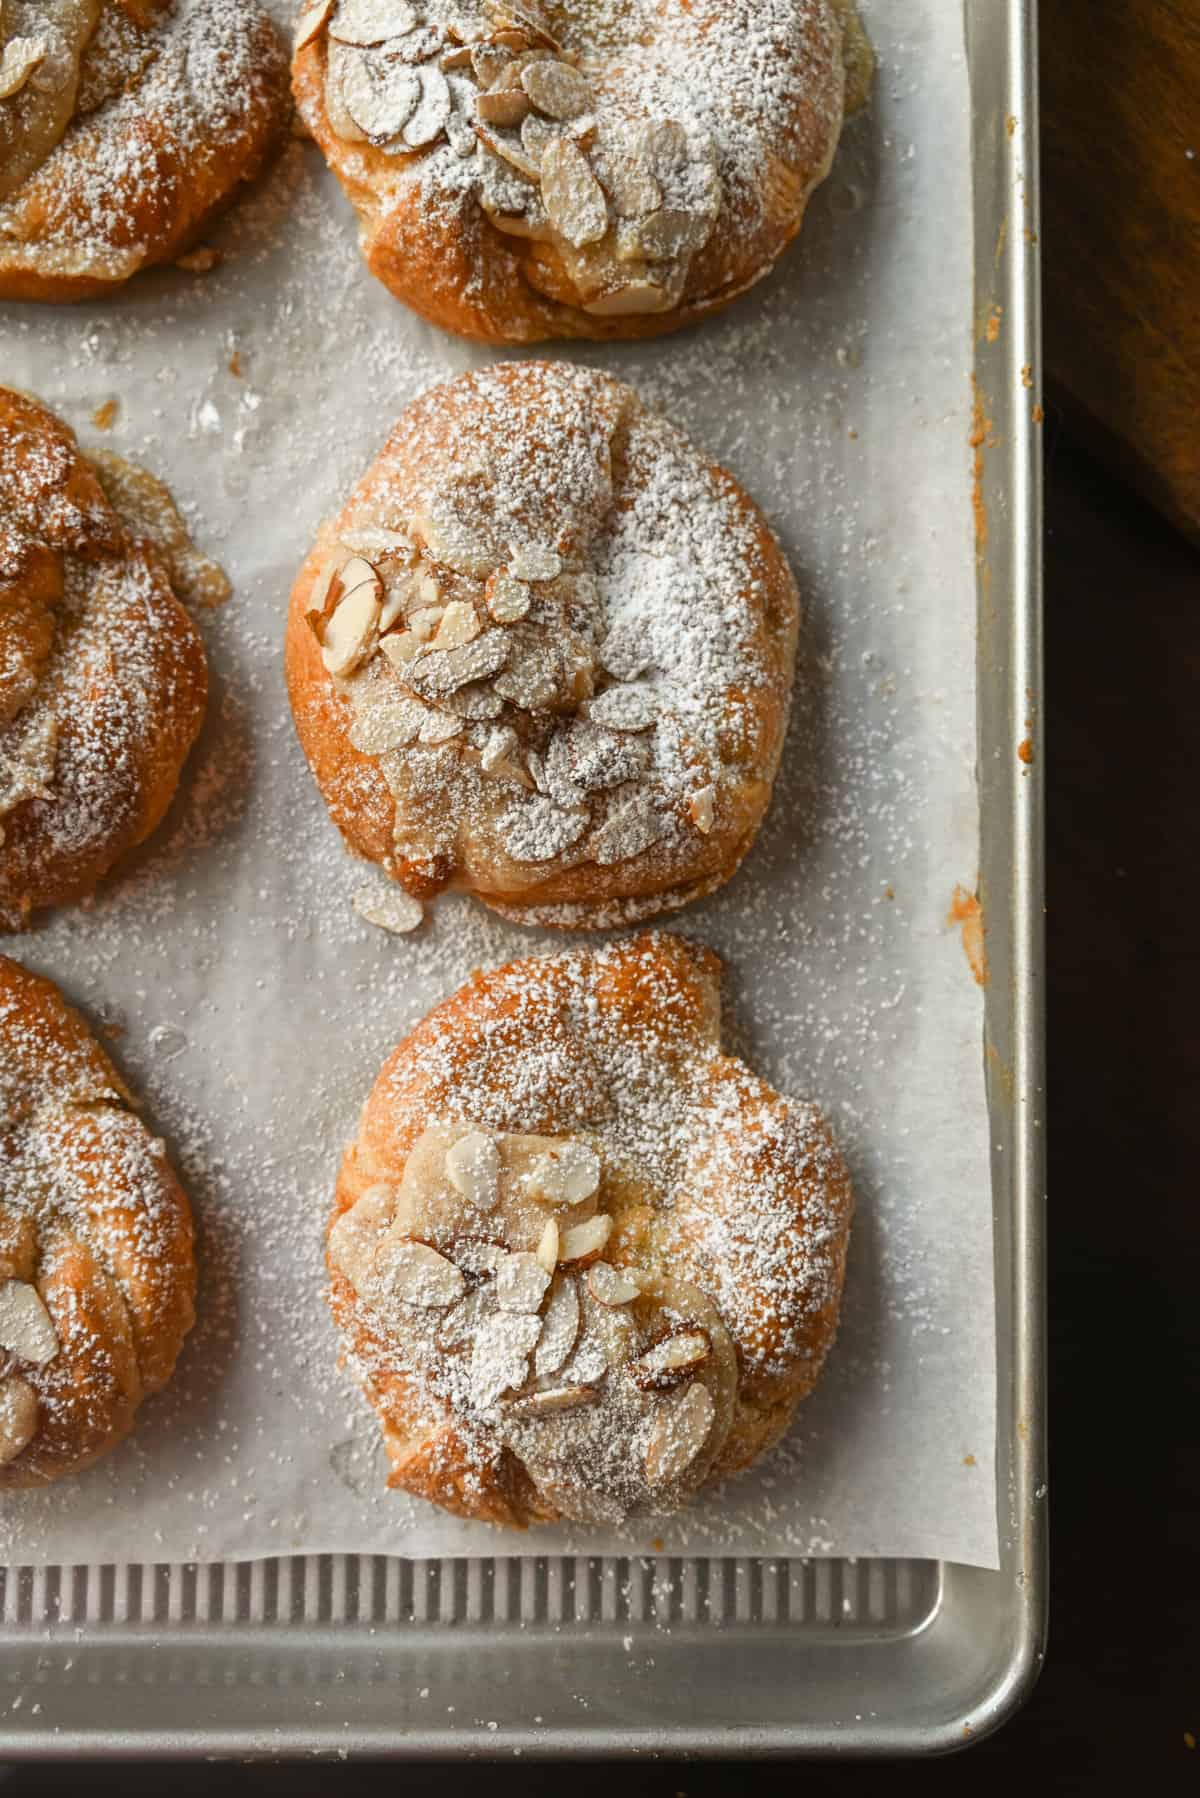 Dust almond croissants with powdered sugar